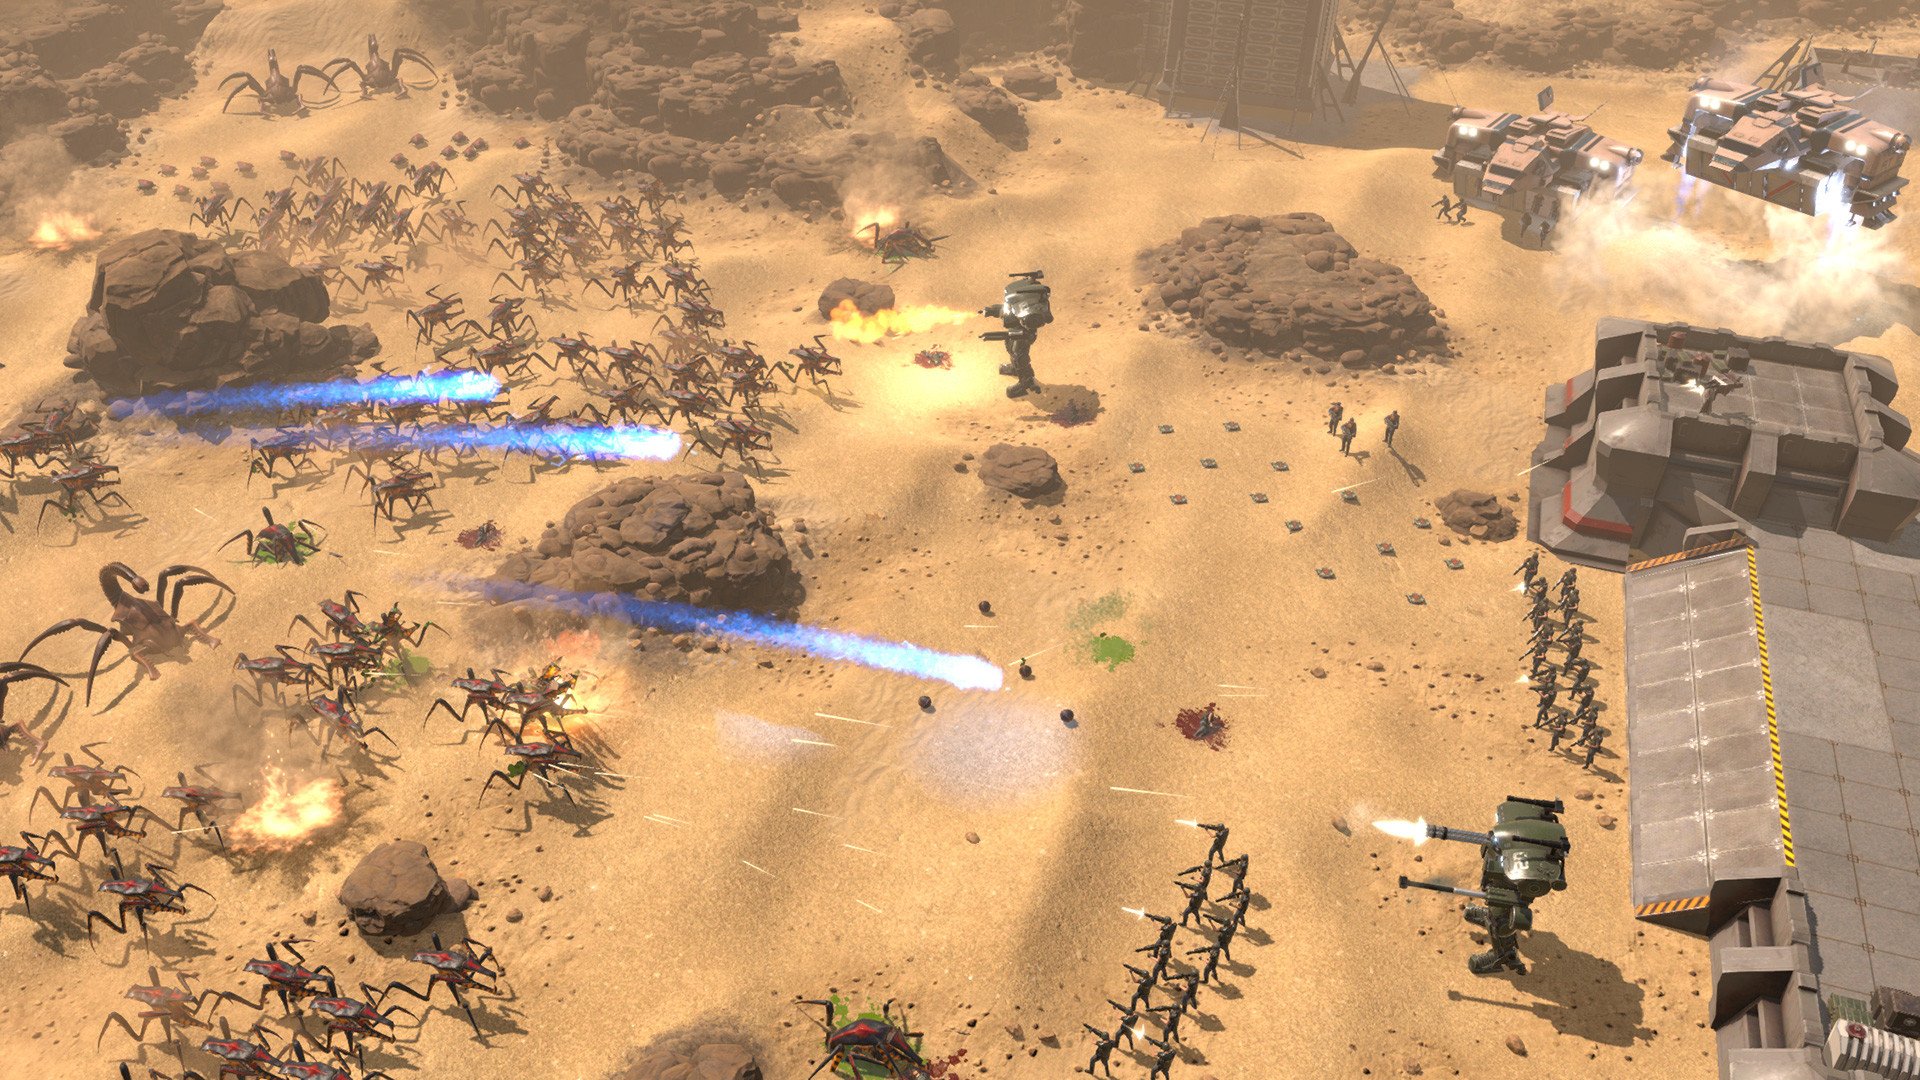 Screenshot for the game Starship Troopers: Terran Command